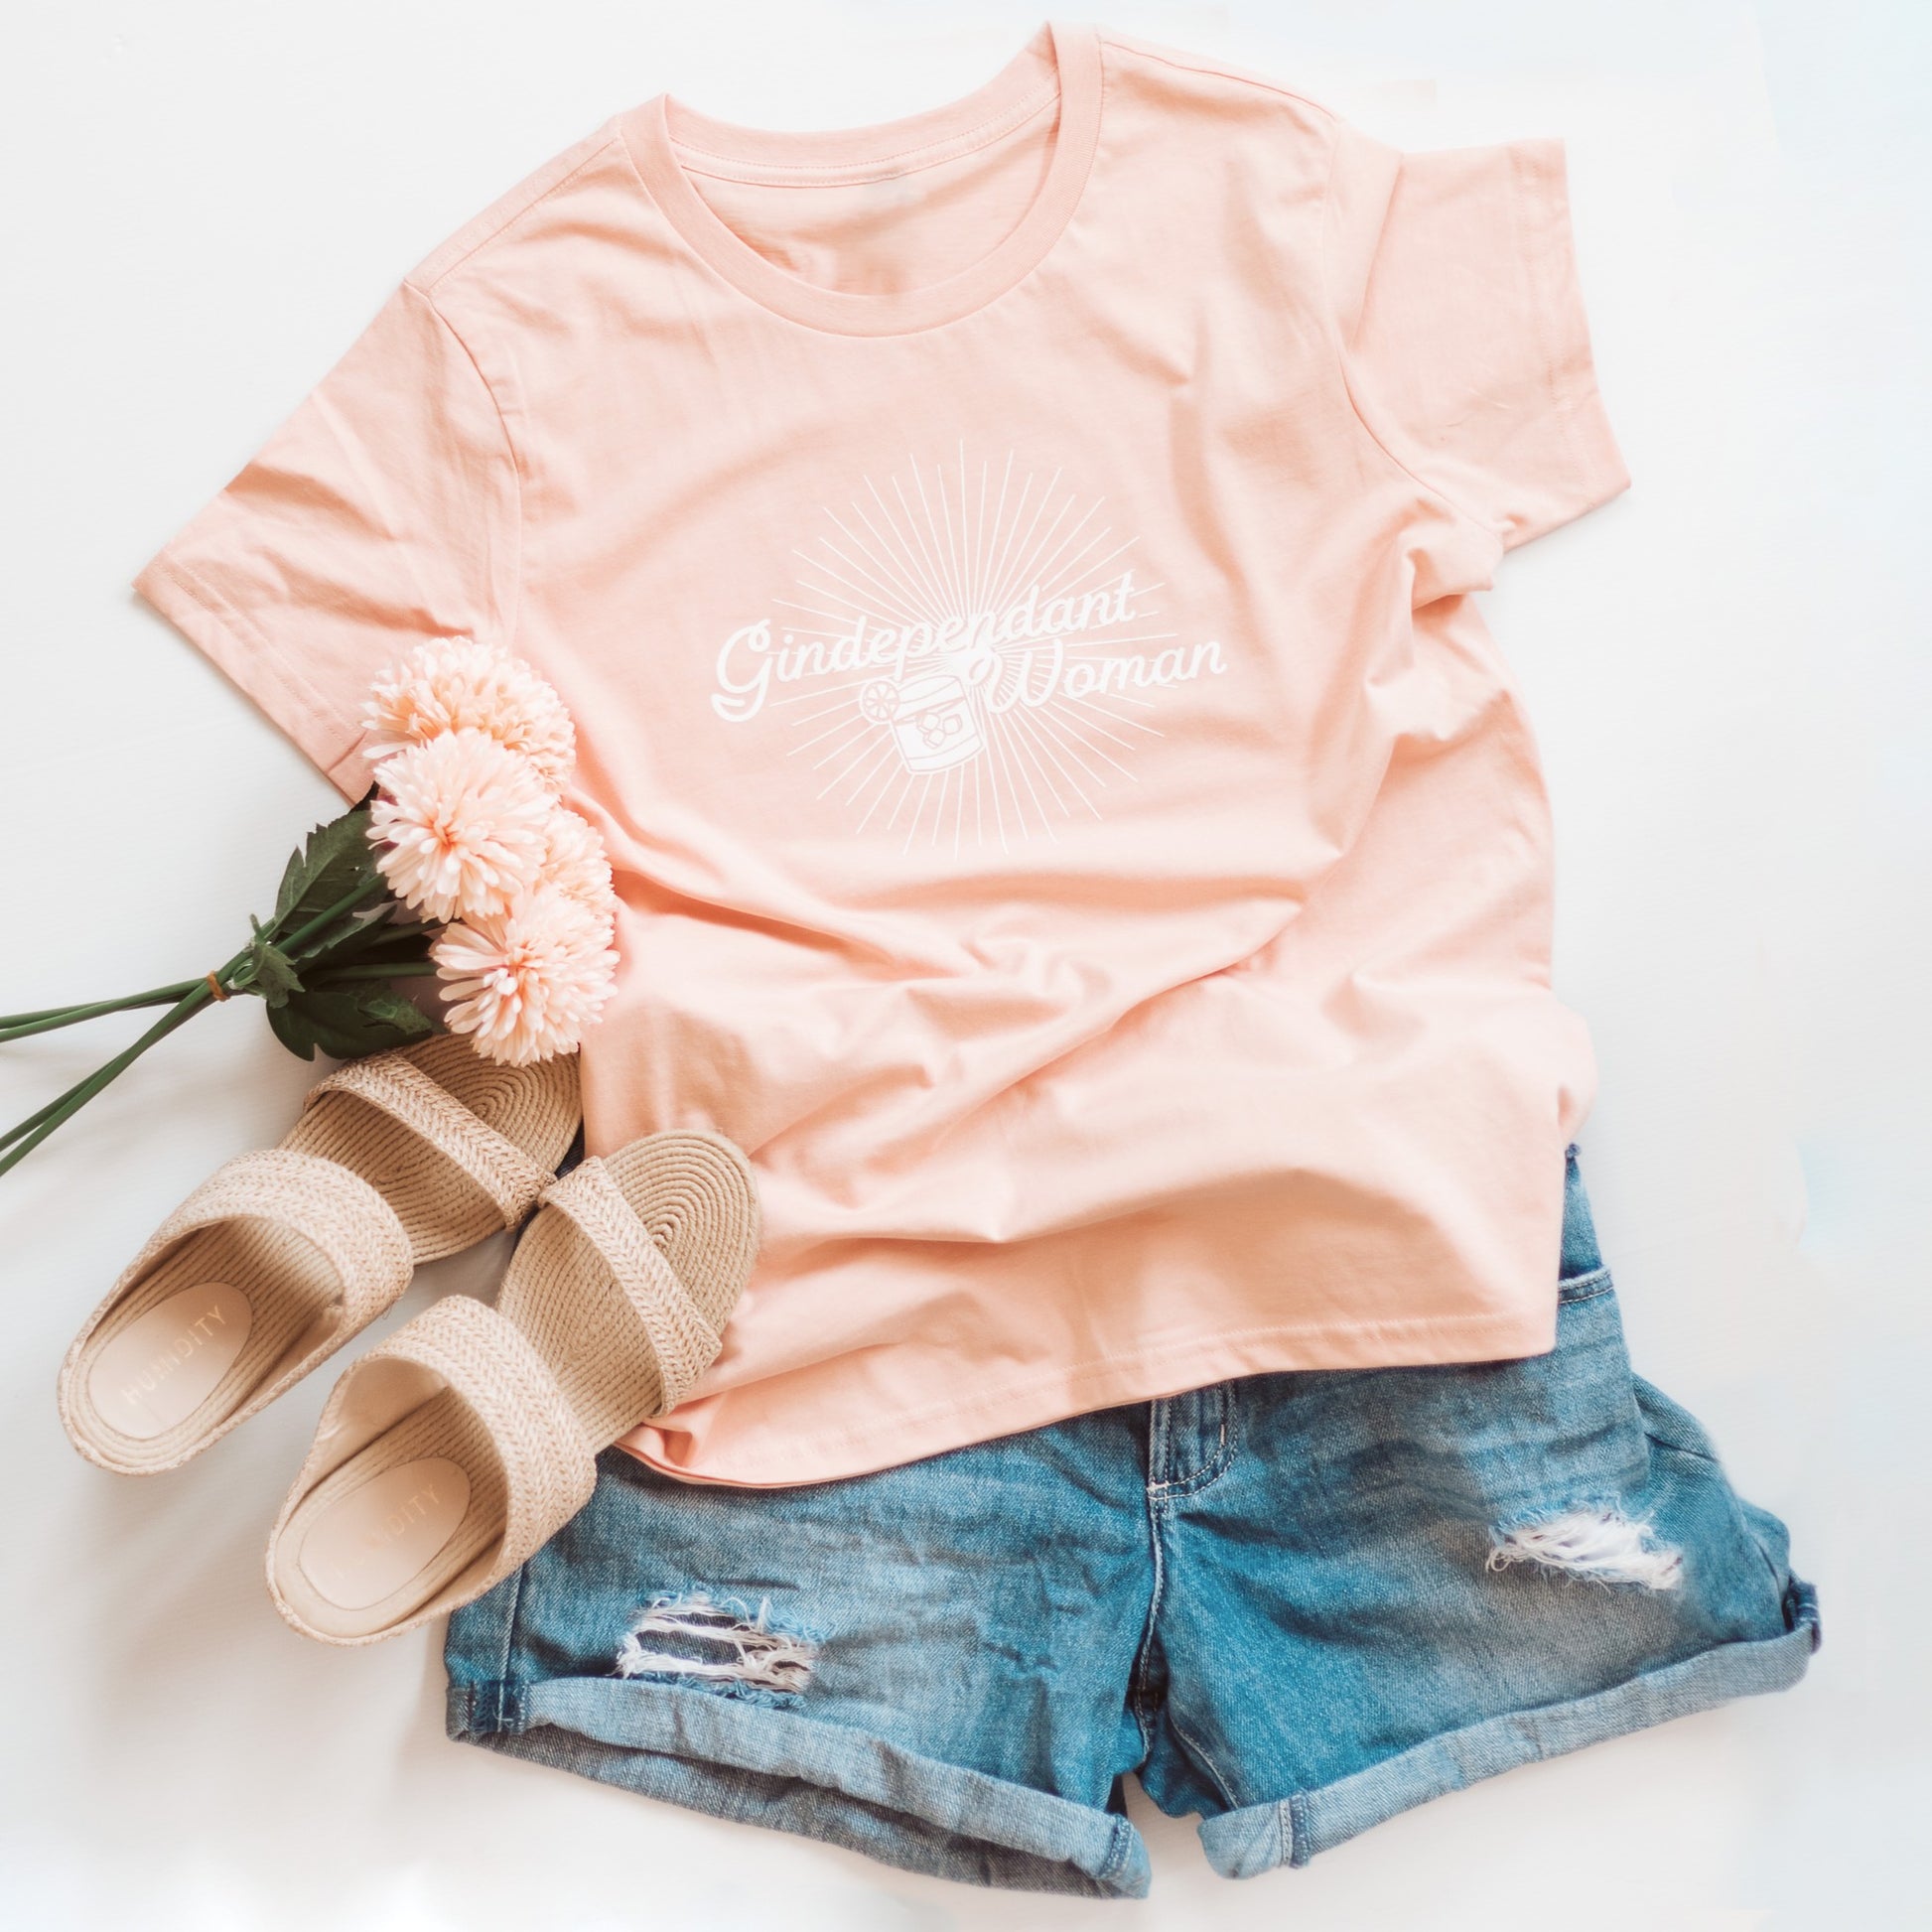 Gindependent Woman tee paired with rattan sandals and jean shorts flat lay; Pale Pink Cotton tee; Australian boho shop, summer outfit